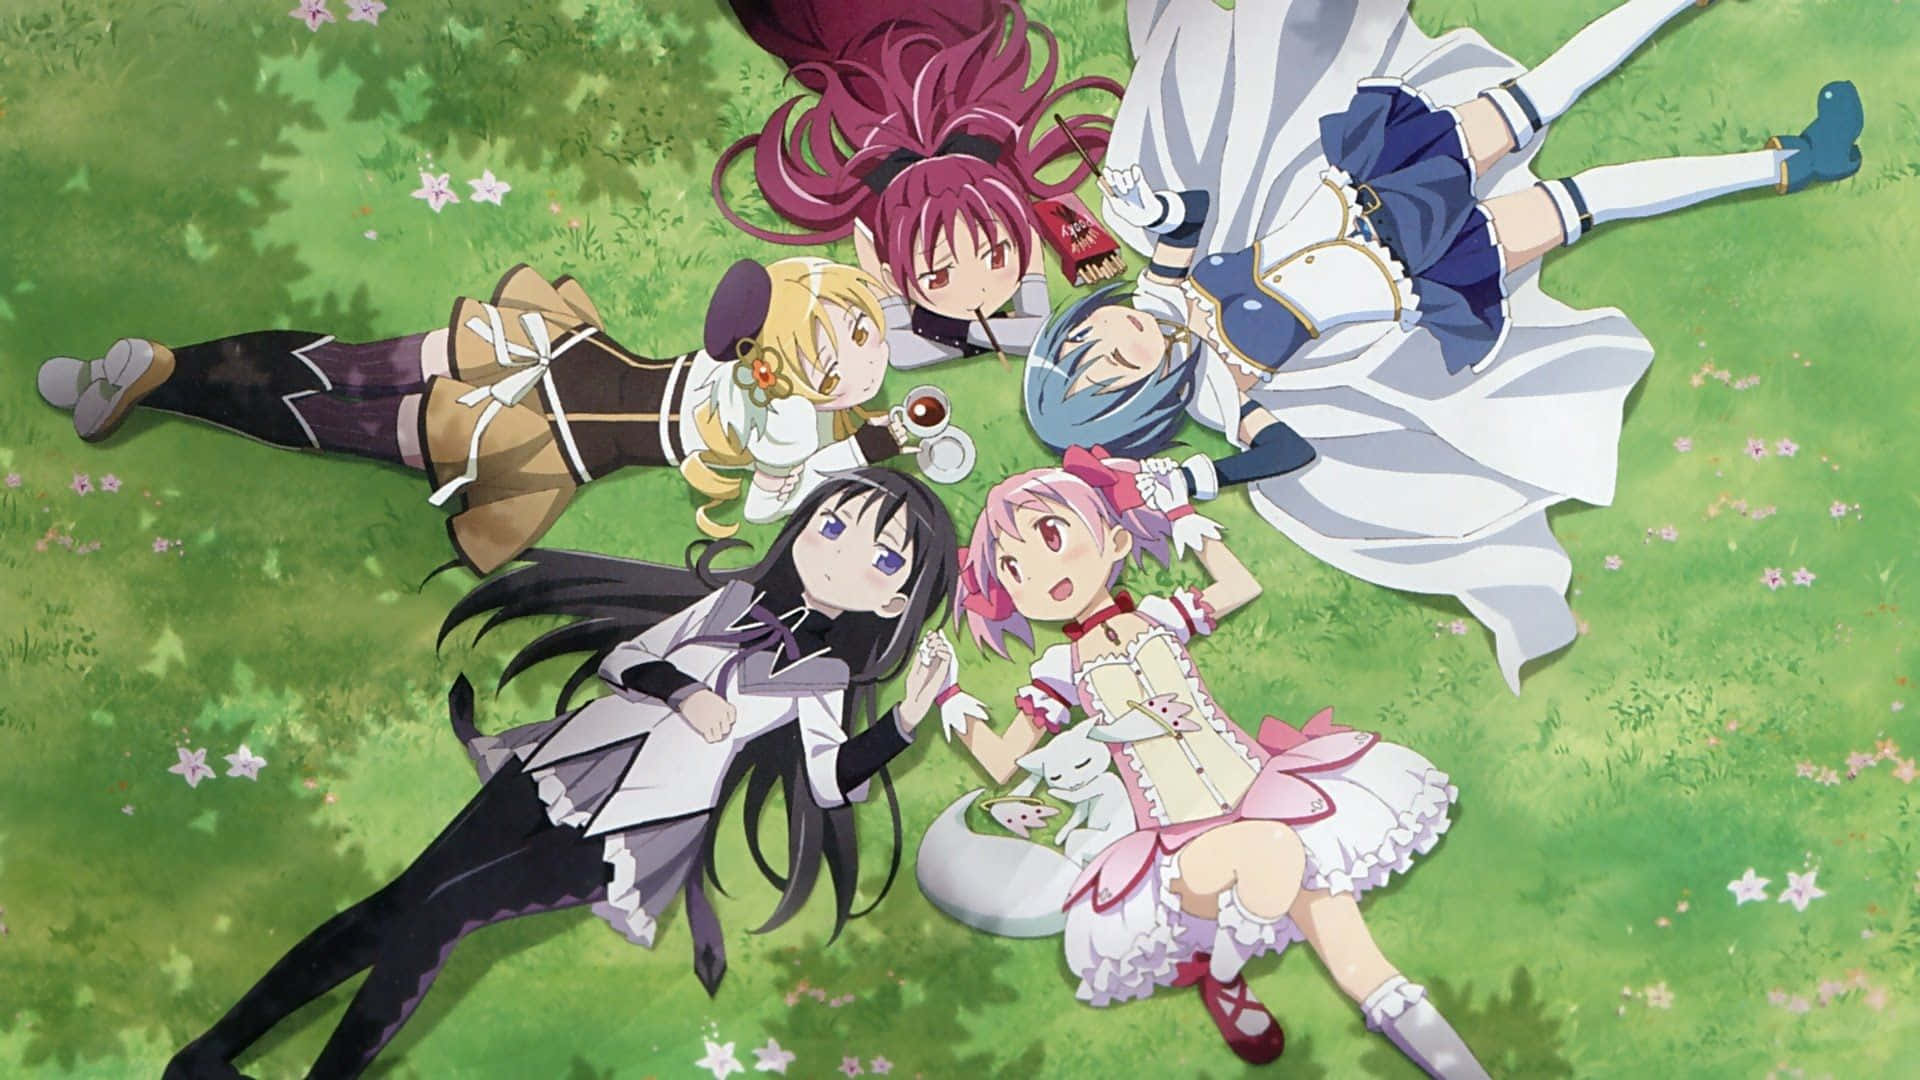 Follow Homura's lead and make a wish on this magical Madoka Magica background